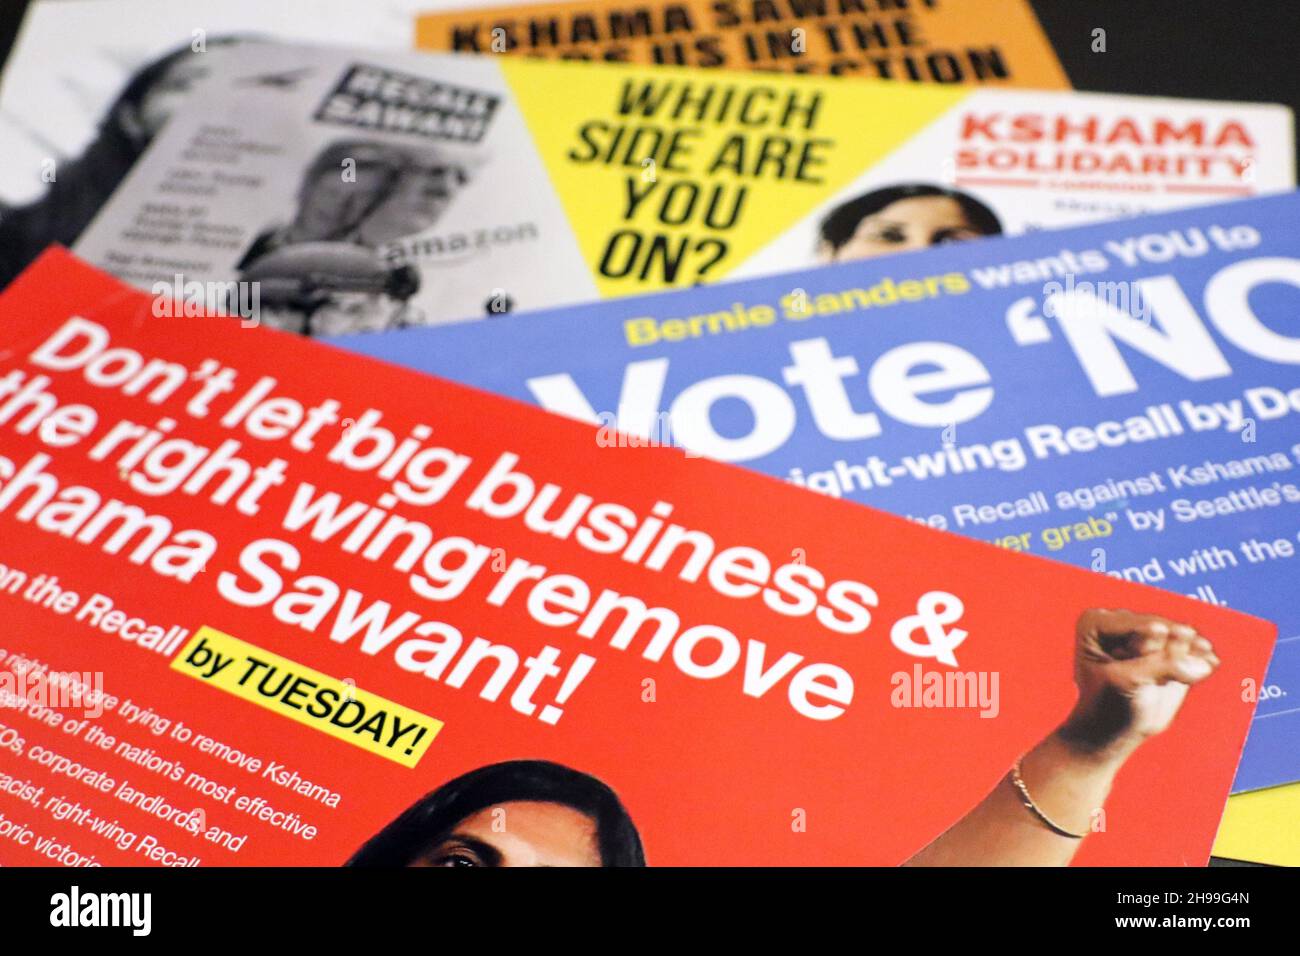 A stack of Kshama Sawant's campaign materials is seen in December 2021. Stock Photo